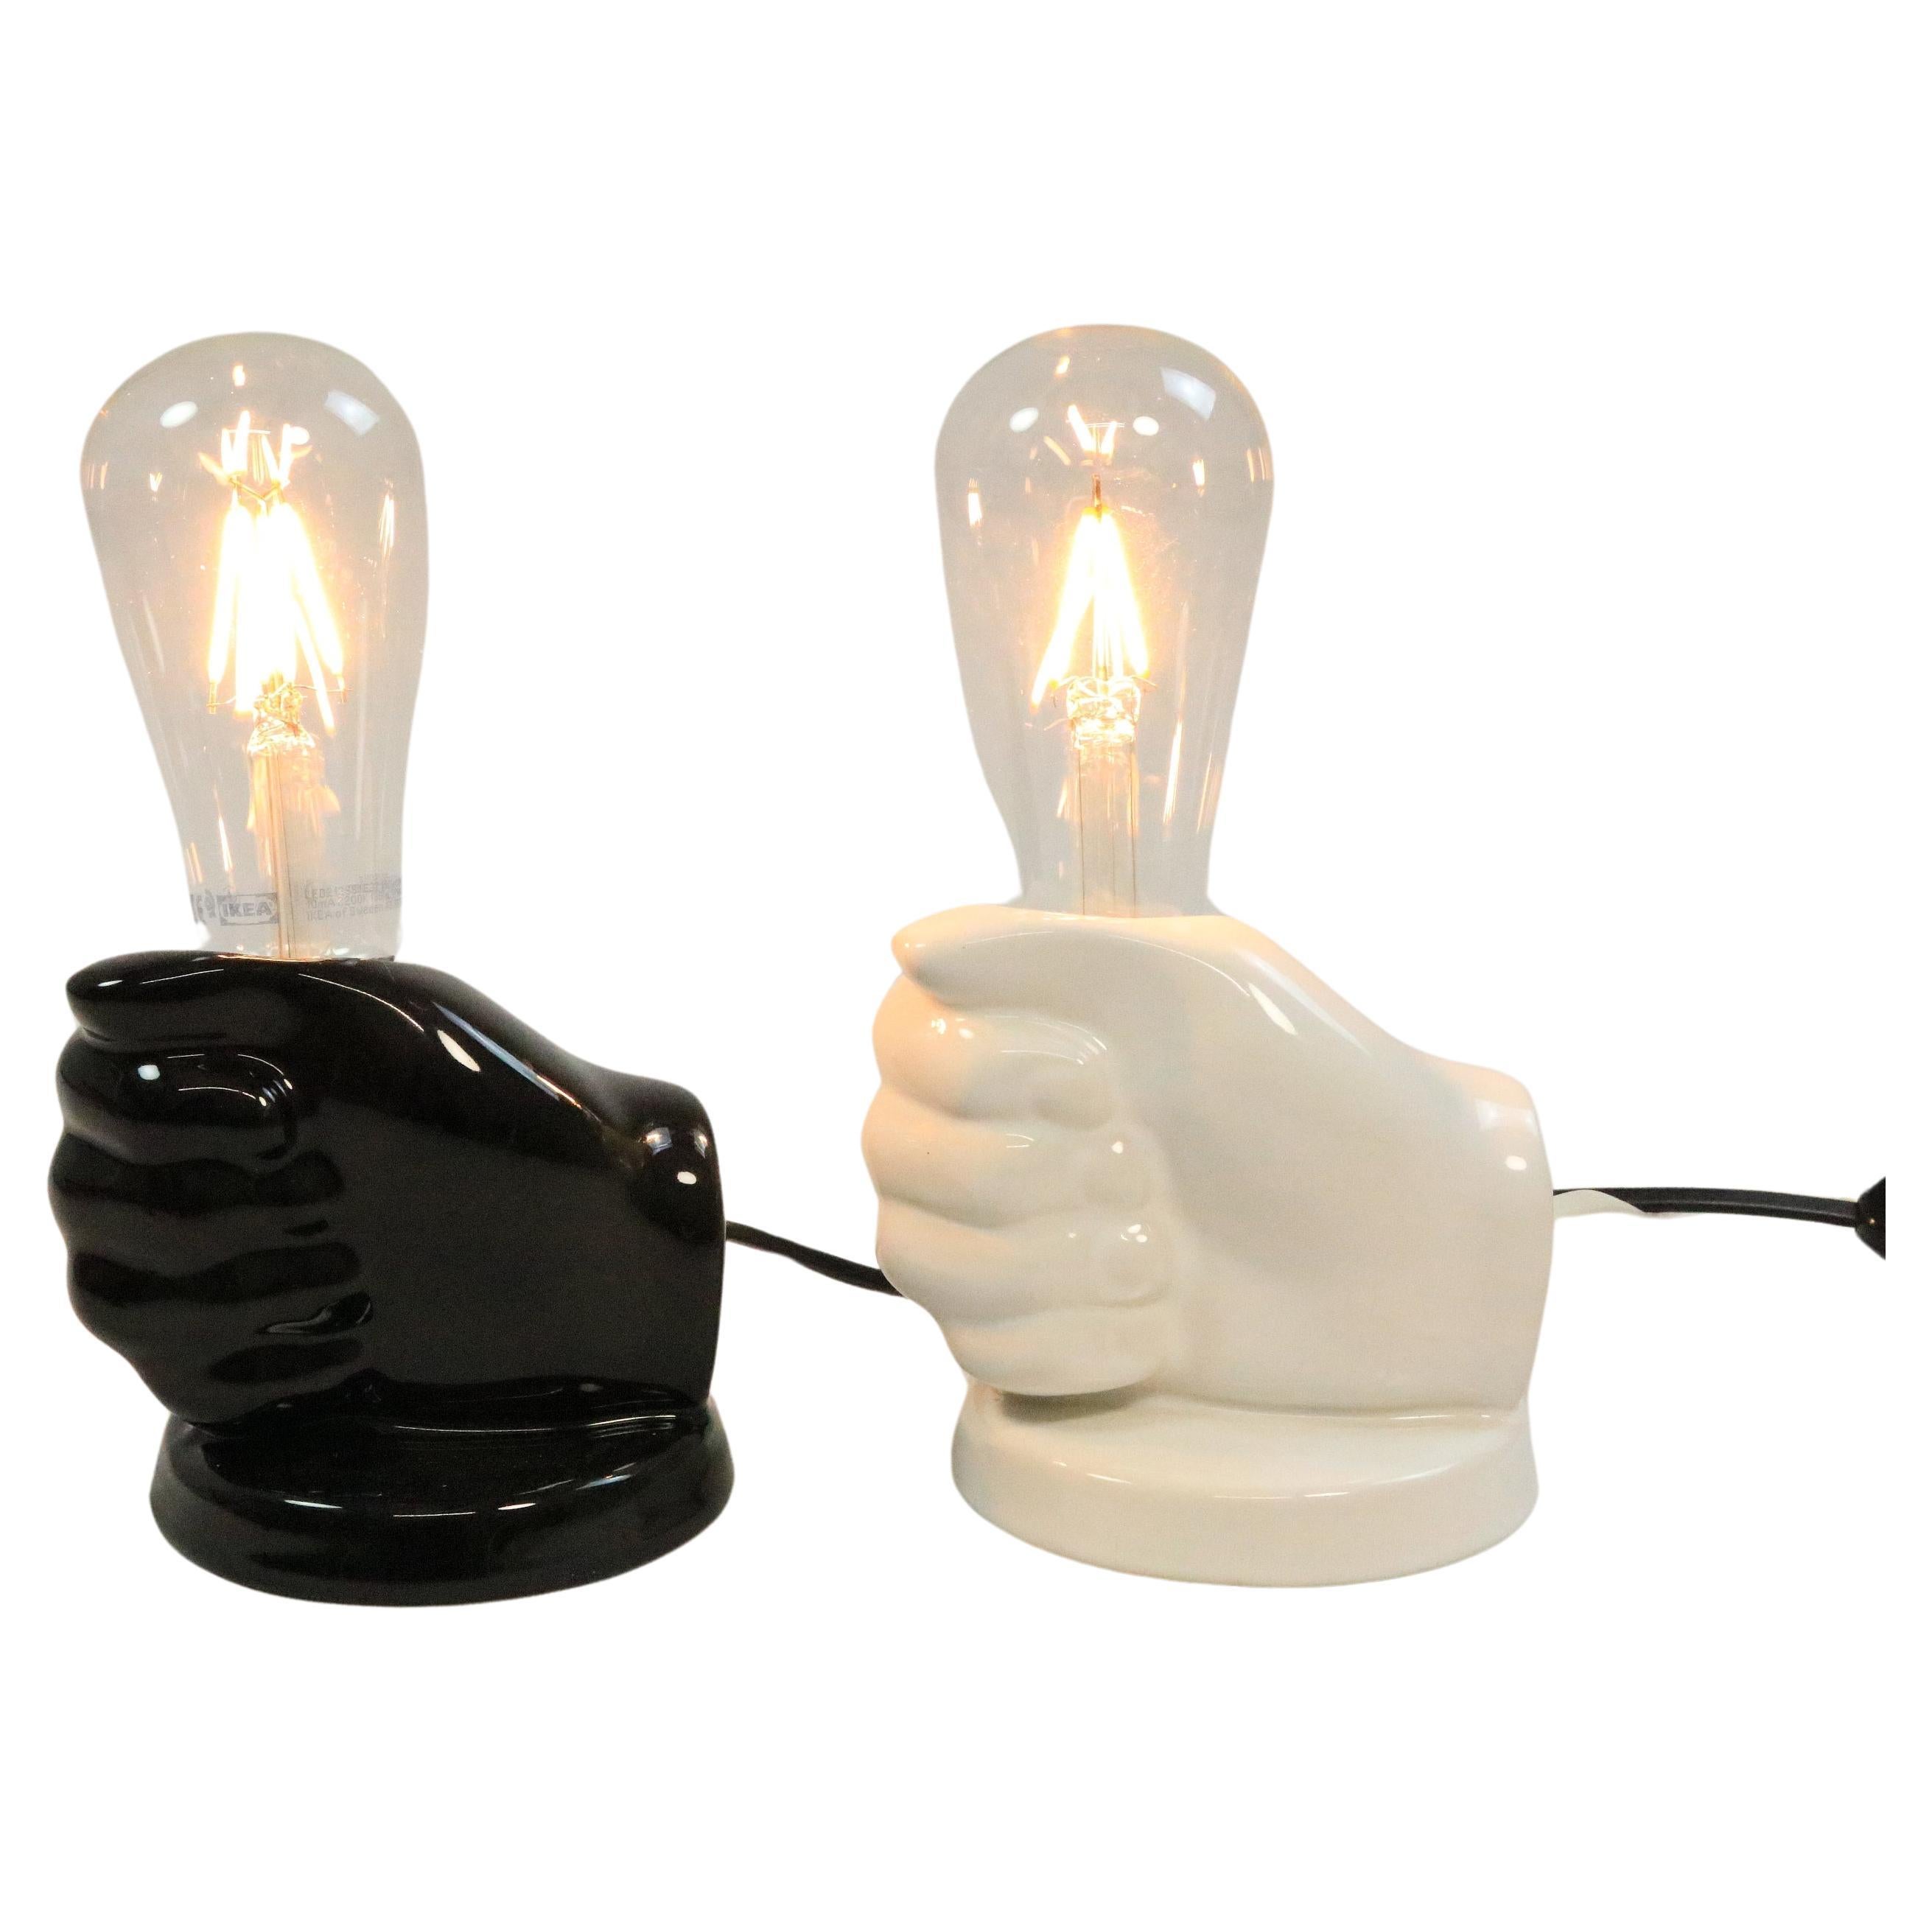 2 x Small Pottery Table Lamp, Hand, Black / White, 1980s, by Aro Germany